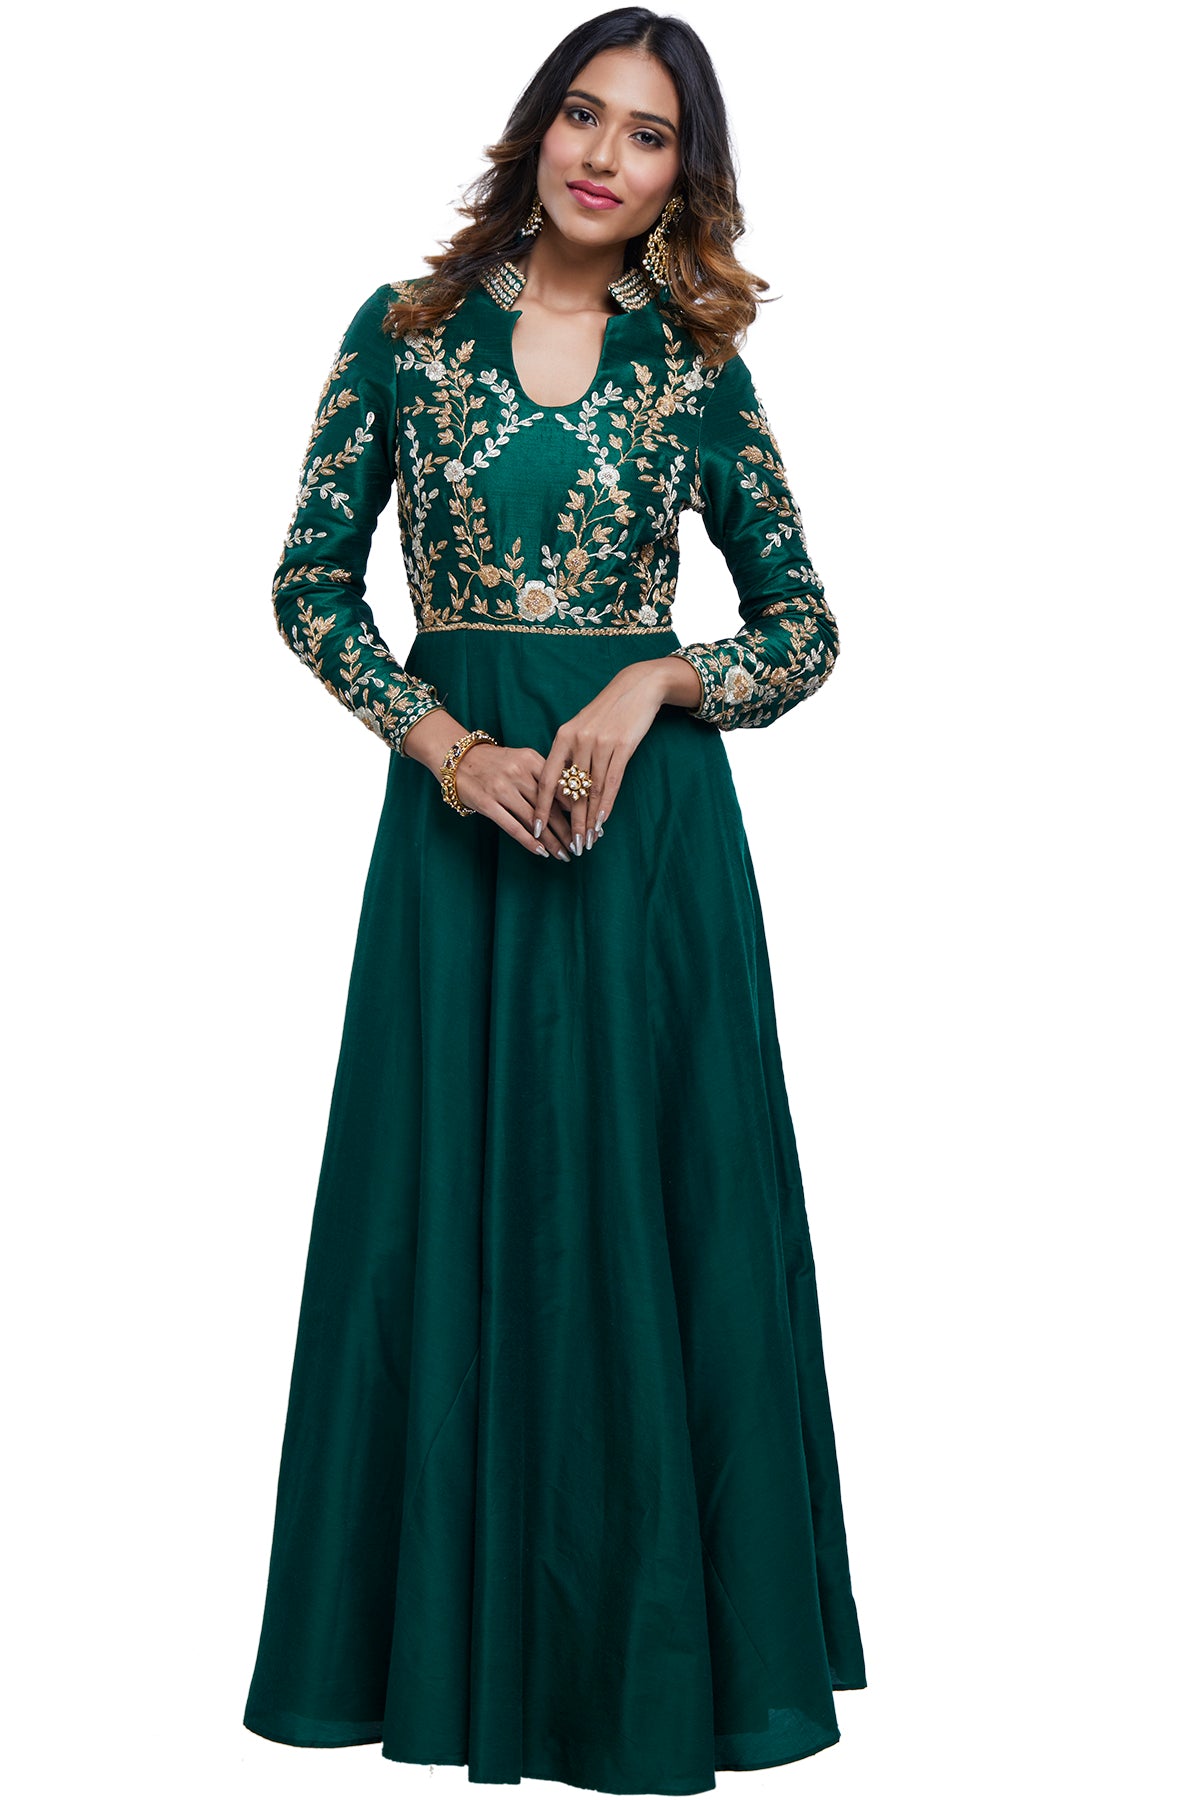 Ethnic Gowns | Bottle Green Gown Combo | Freeup